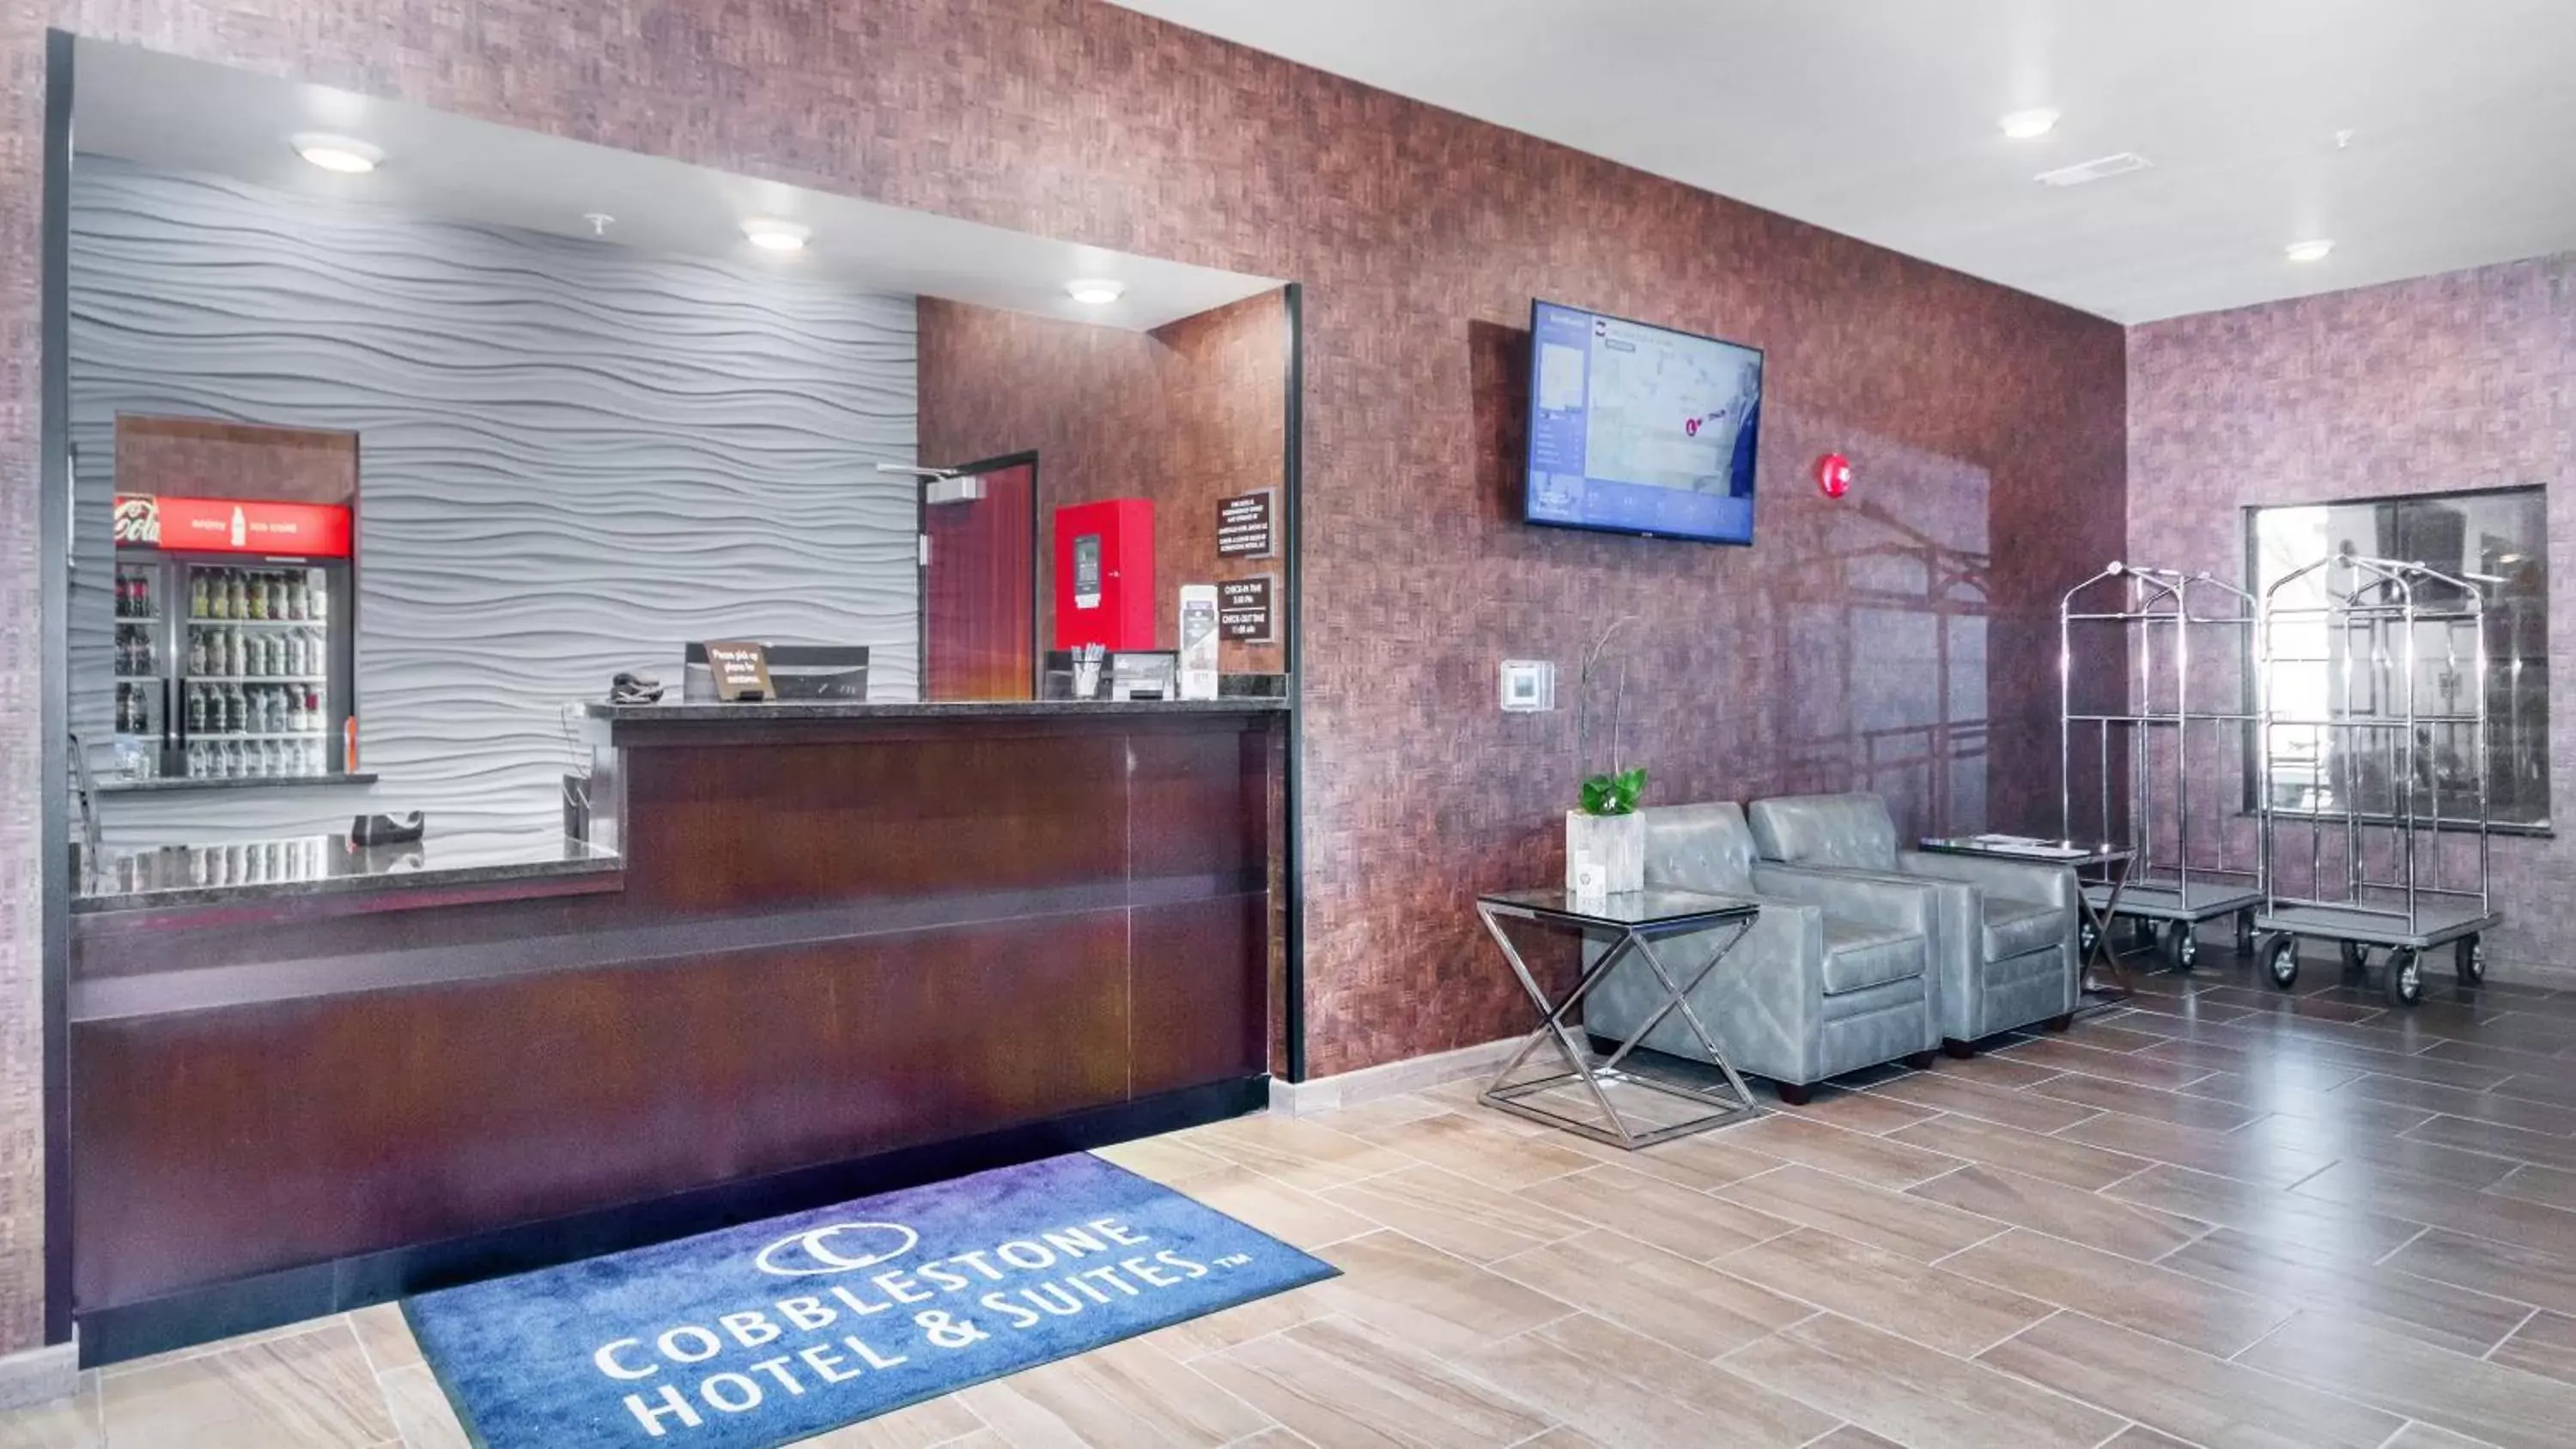 Lobby or reception in Cobblestone Hotel & Suites - Janesville